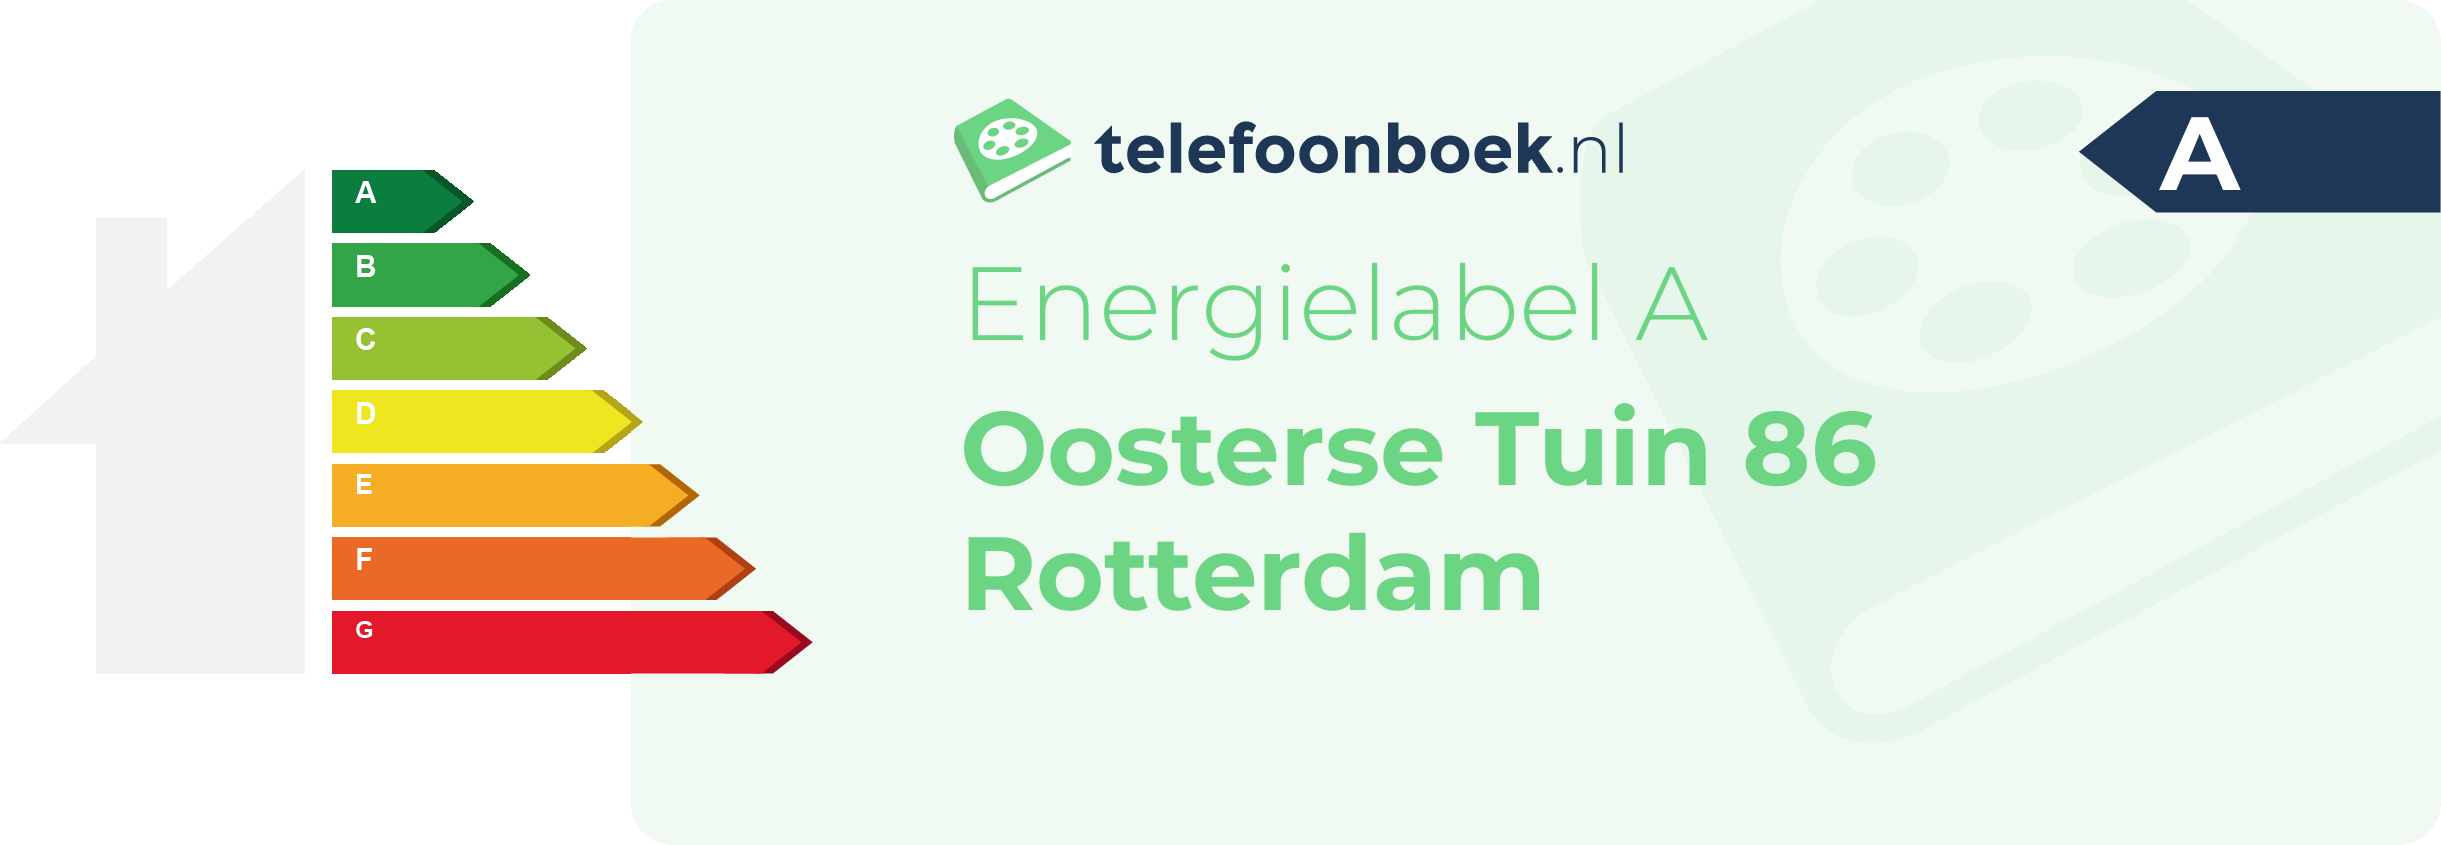 Energielabel Oosterse Tuin 86 Rotterdam